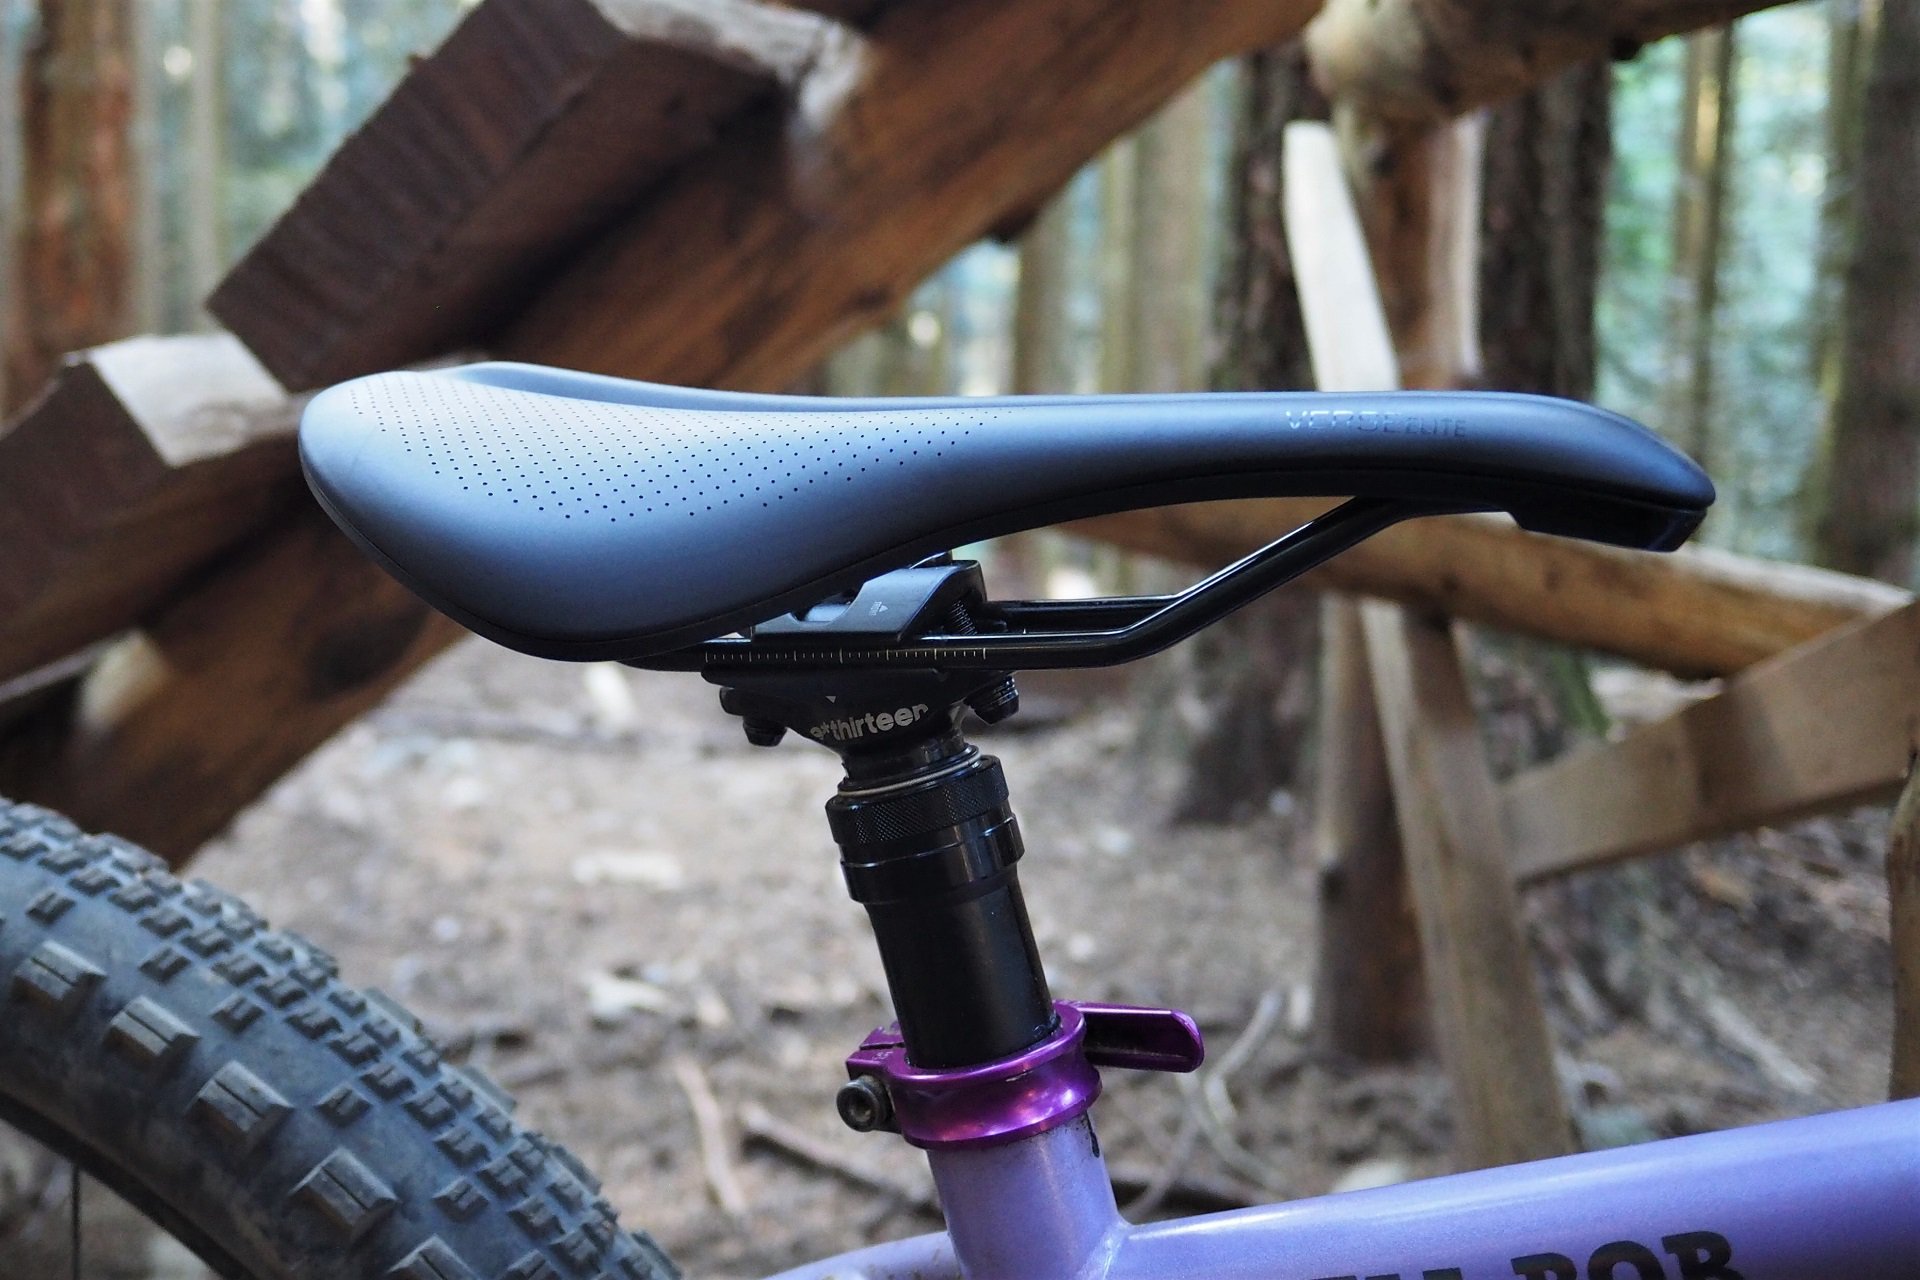 Bontrager Verse, A Saddle For All Riders